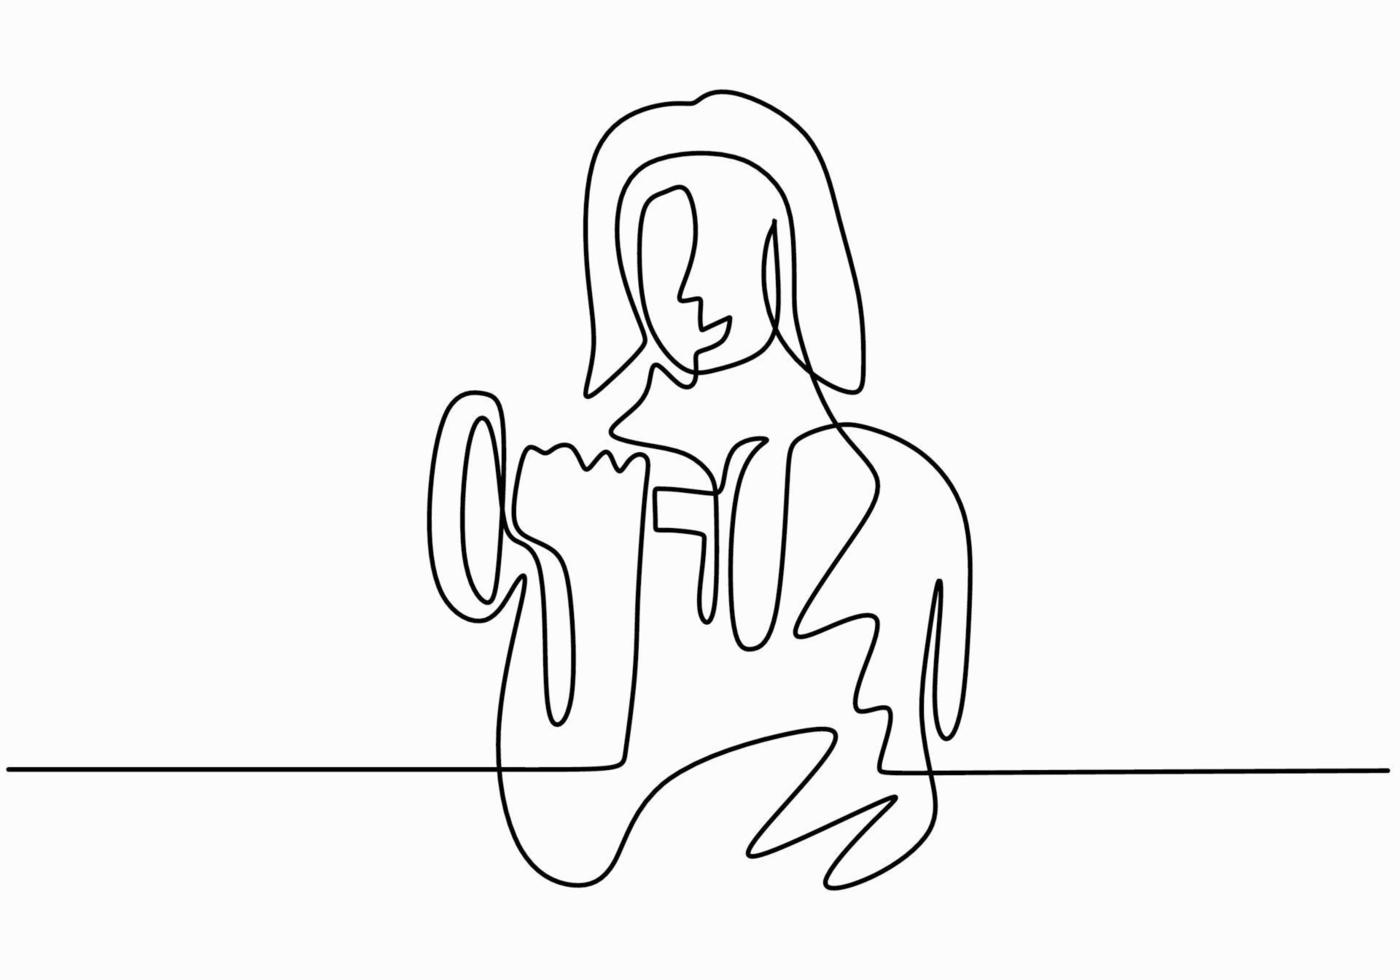 Continuous one line drawing of strong woman lifting weights. Young energetic girl exercise lifting barbell in gym fitness center. Squats with barbell linear design element. Vector illustration